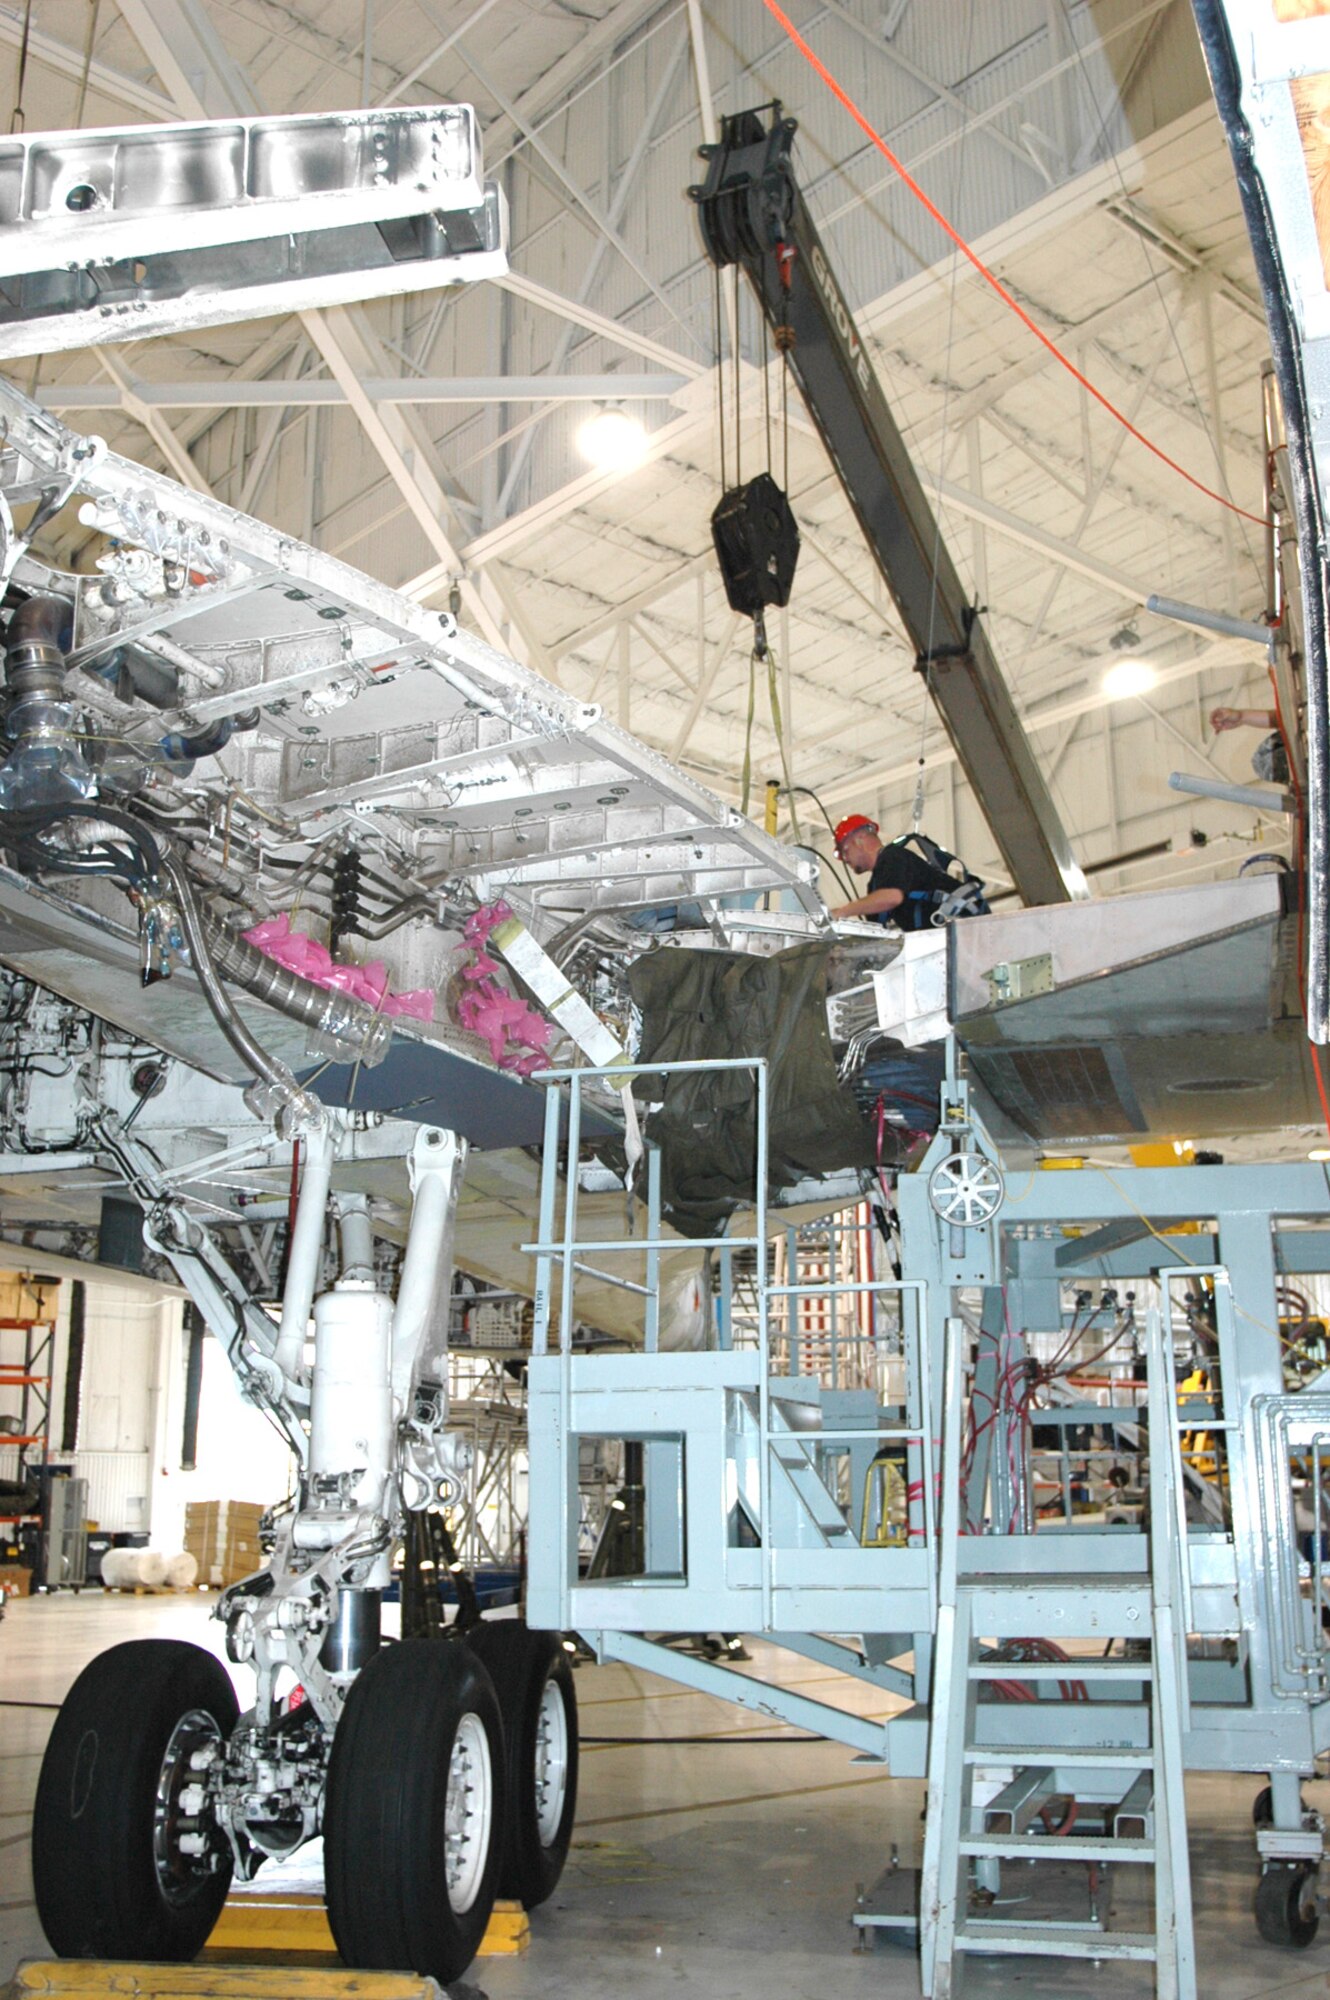 The process is complicated because the engines and the engine nacelles must be removed to allow access to the pivot pins. Balsa wood is built in to plug any gaps and keep liquid nitrogen from pouring out. Heating blankets were also placed to heat and expand the structure surrounding the pin. (Air Force photo by Howdy Stout)